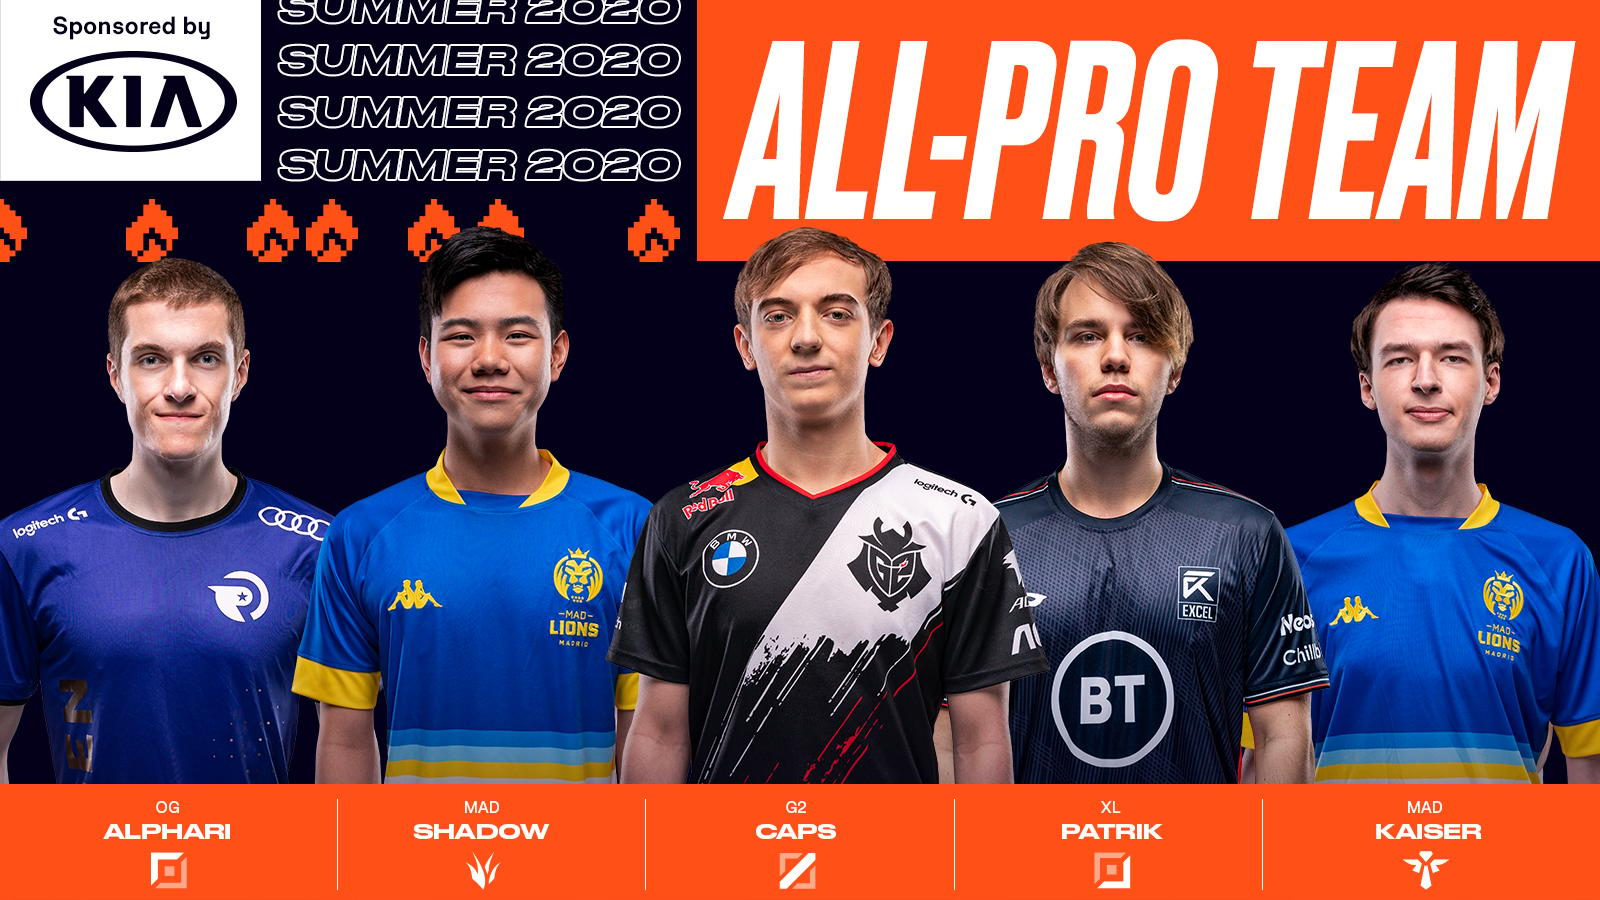 LEC's All-Pro team summer 2020 players